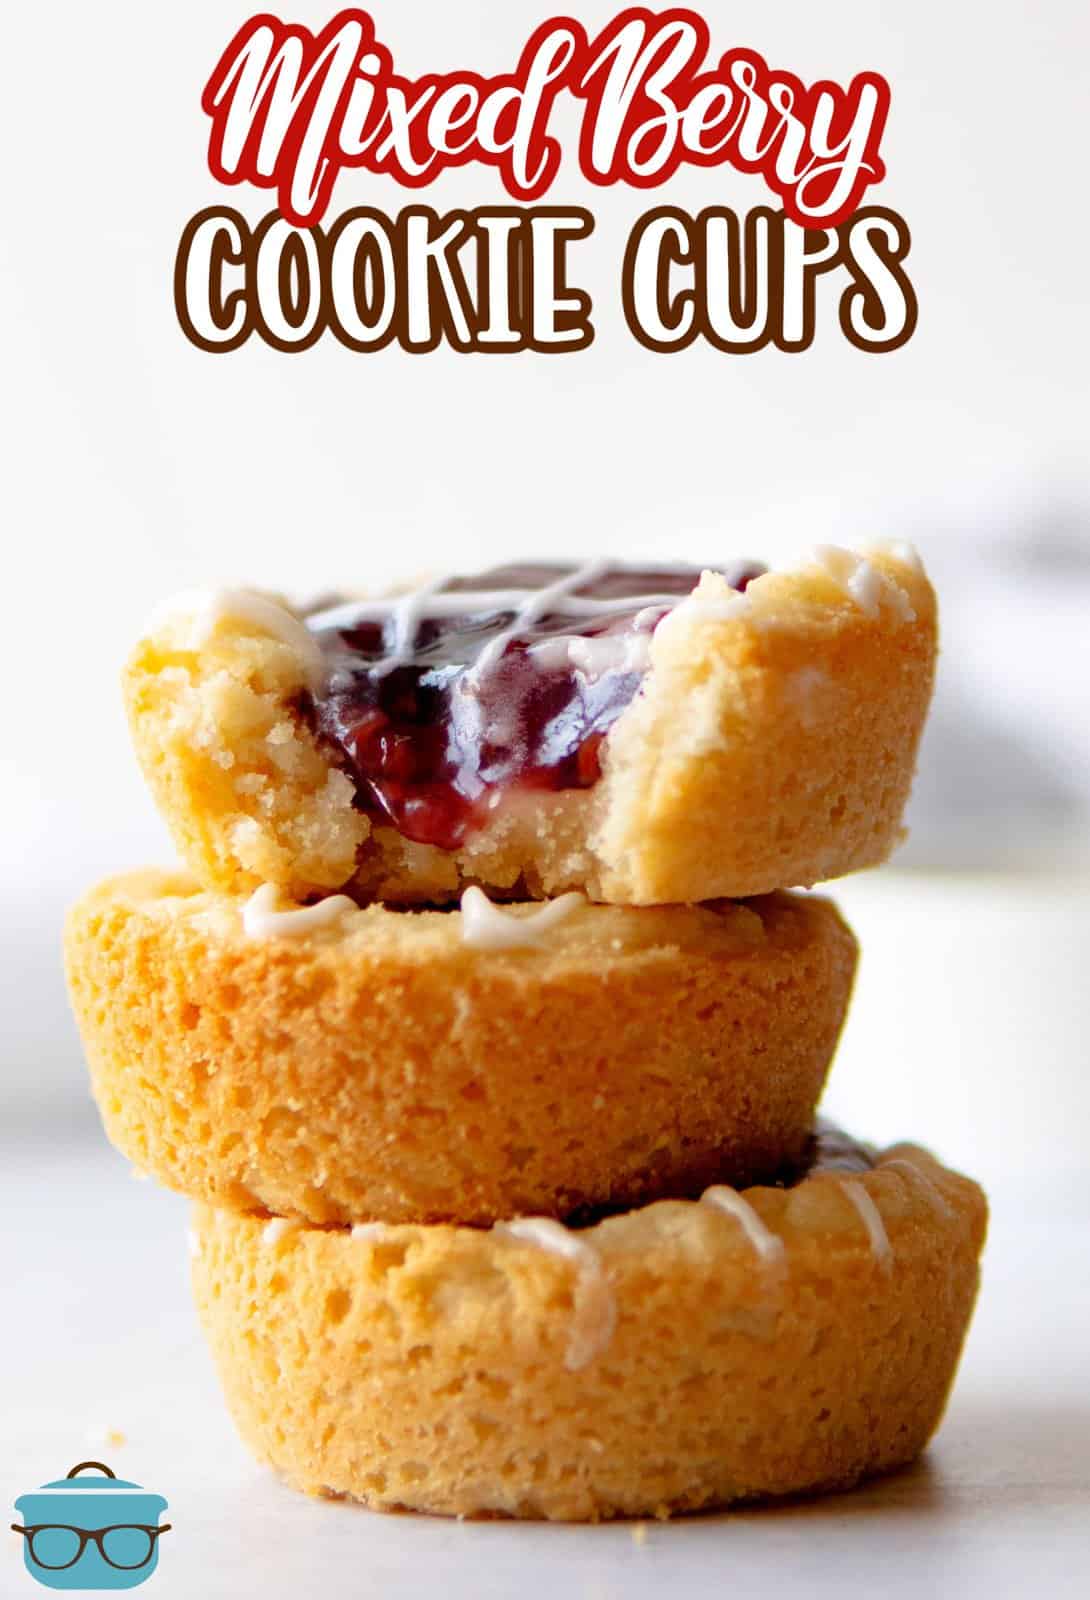 Pinterest image of stacked Berry Cookie Cups with bite taken out of top one.